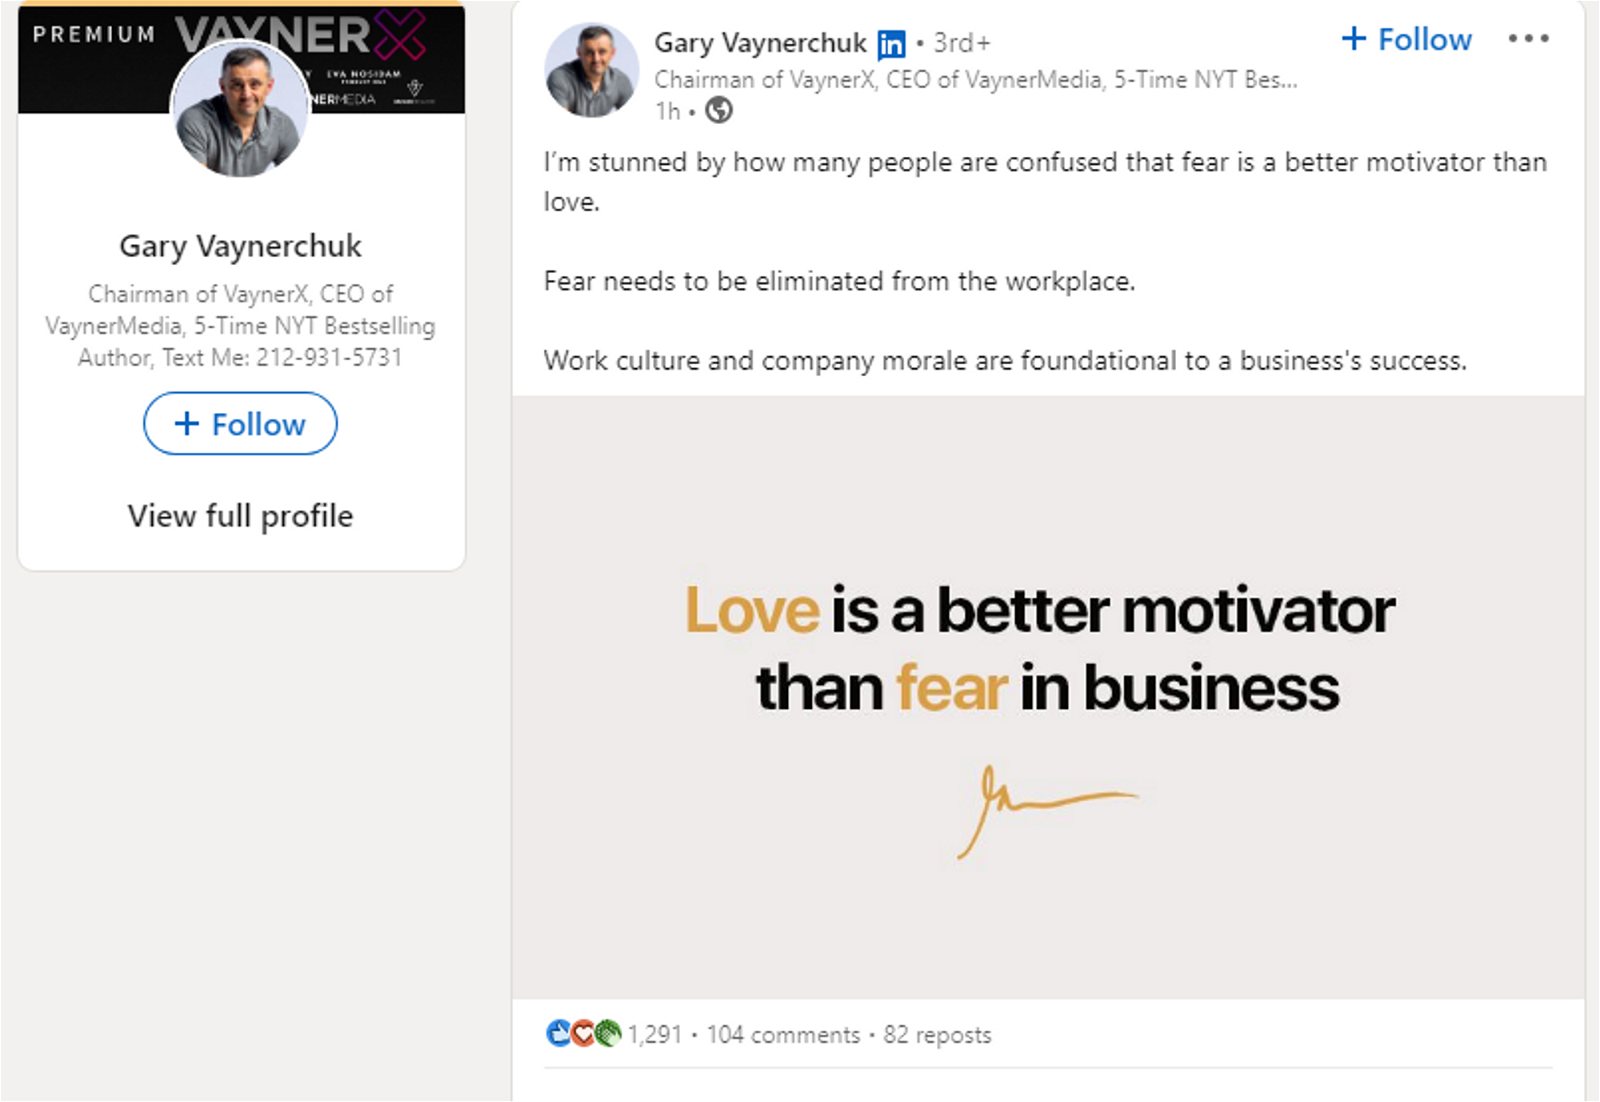 Gary Vaynerchuk uses emotional images and motivational posts to improve the reach of his personal brand. 